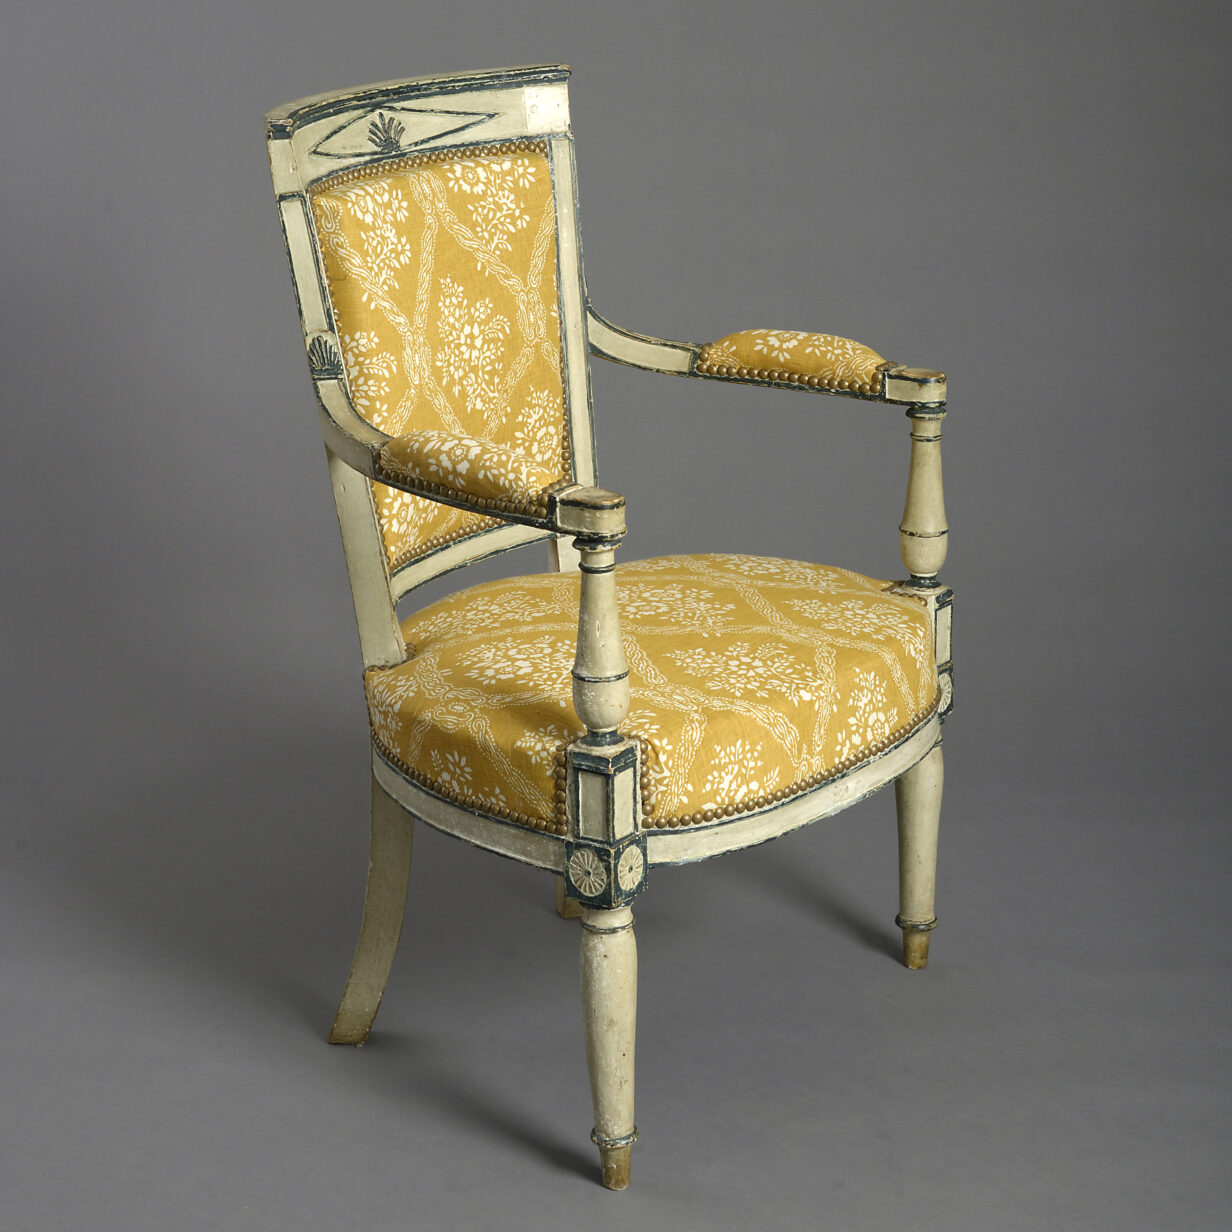 19th century directoire style painted fauteuil armchair